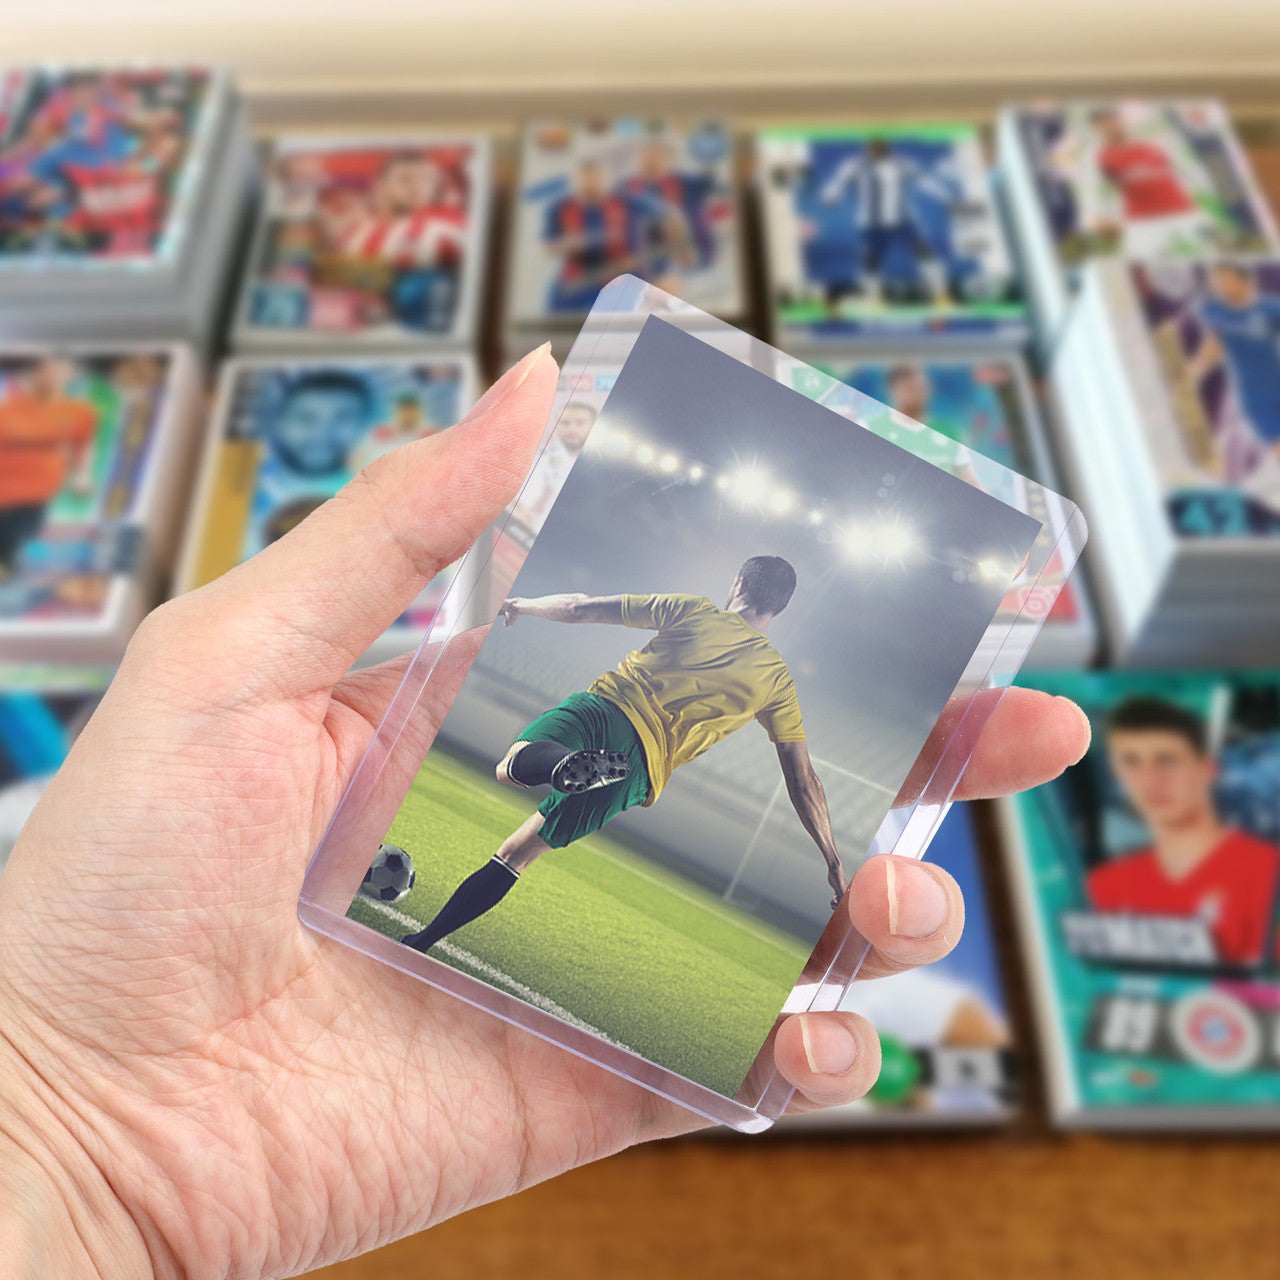 3” X 4” Top Load Card Holder for Standard Trading Cards 25-Count for Baseball, Football, Basketball, Hockey, Golf, Single Sports Cards Top Loads